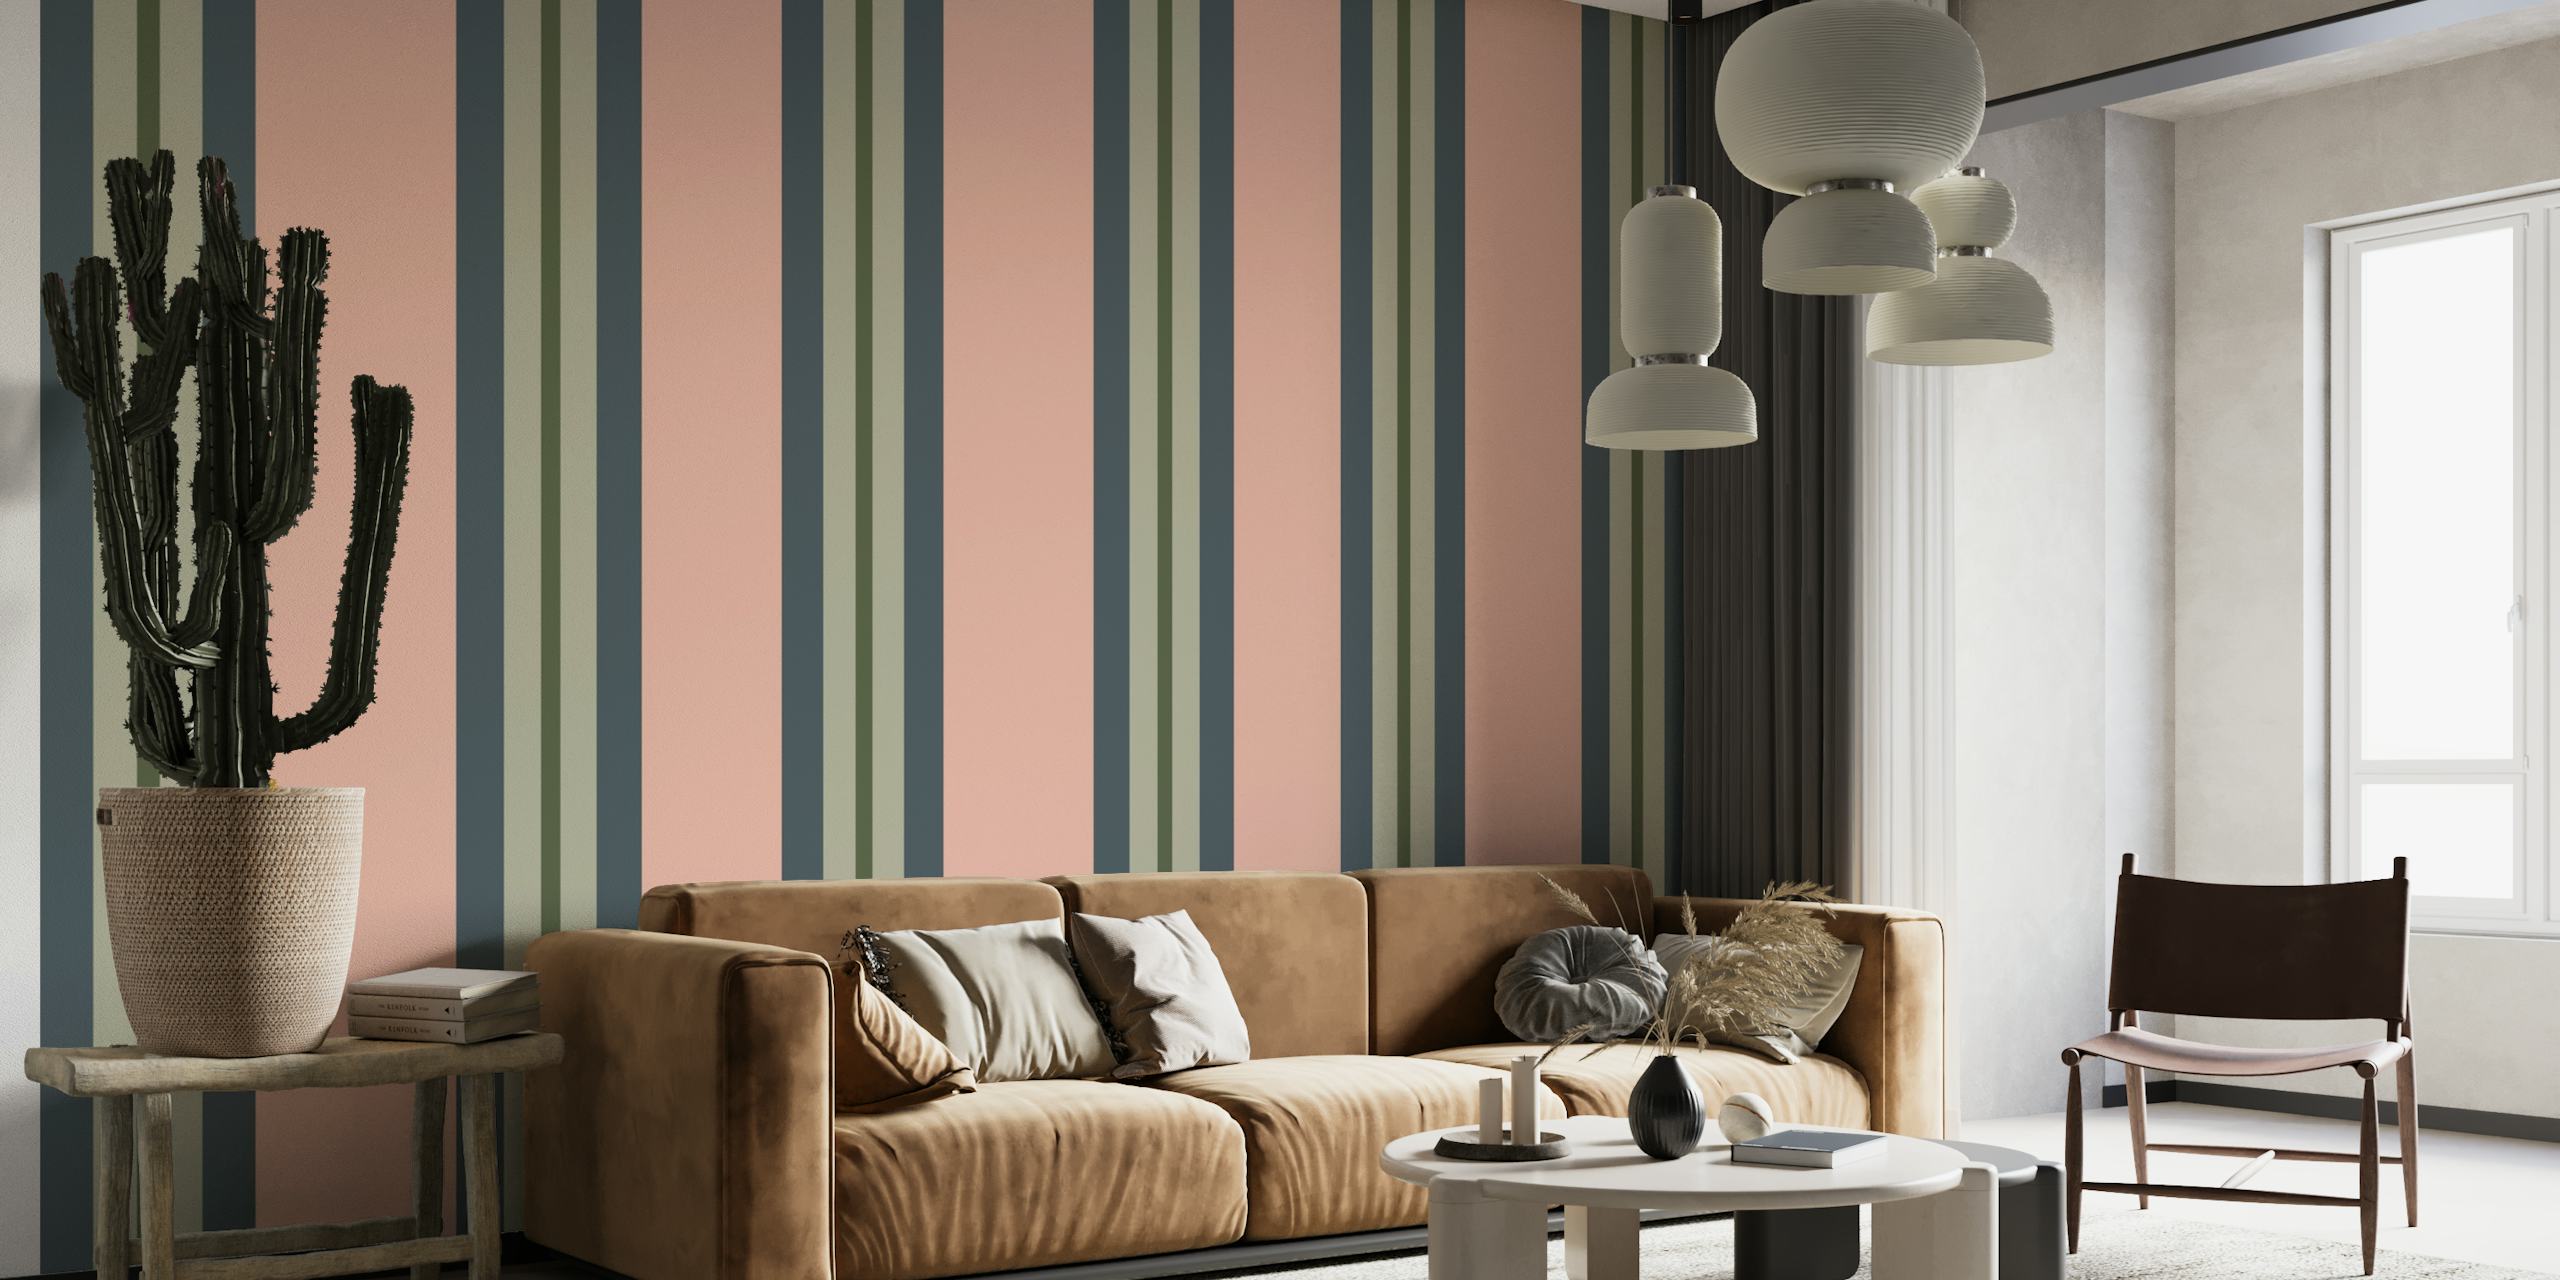 Classic Stripes 3 wall mural with alternating shades of peach and green